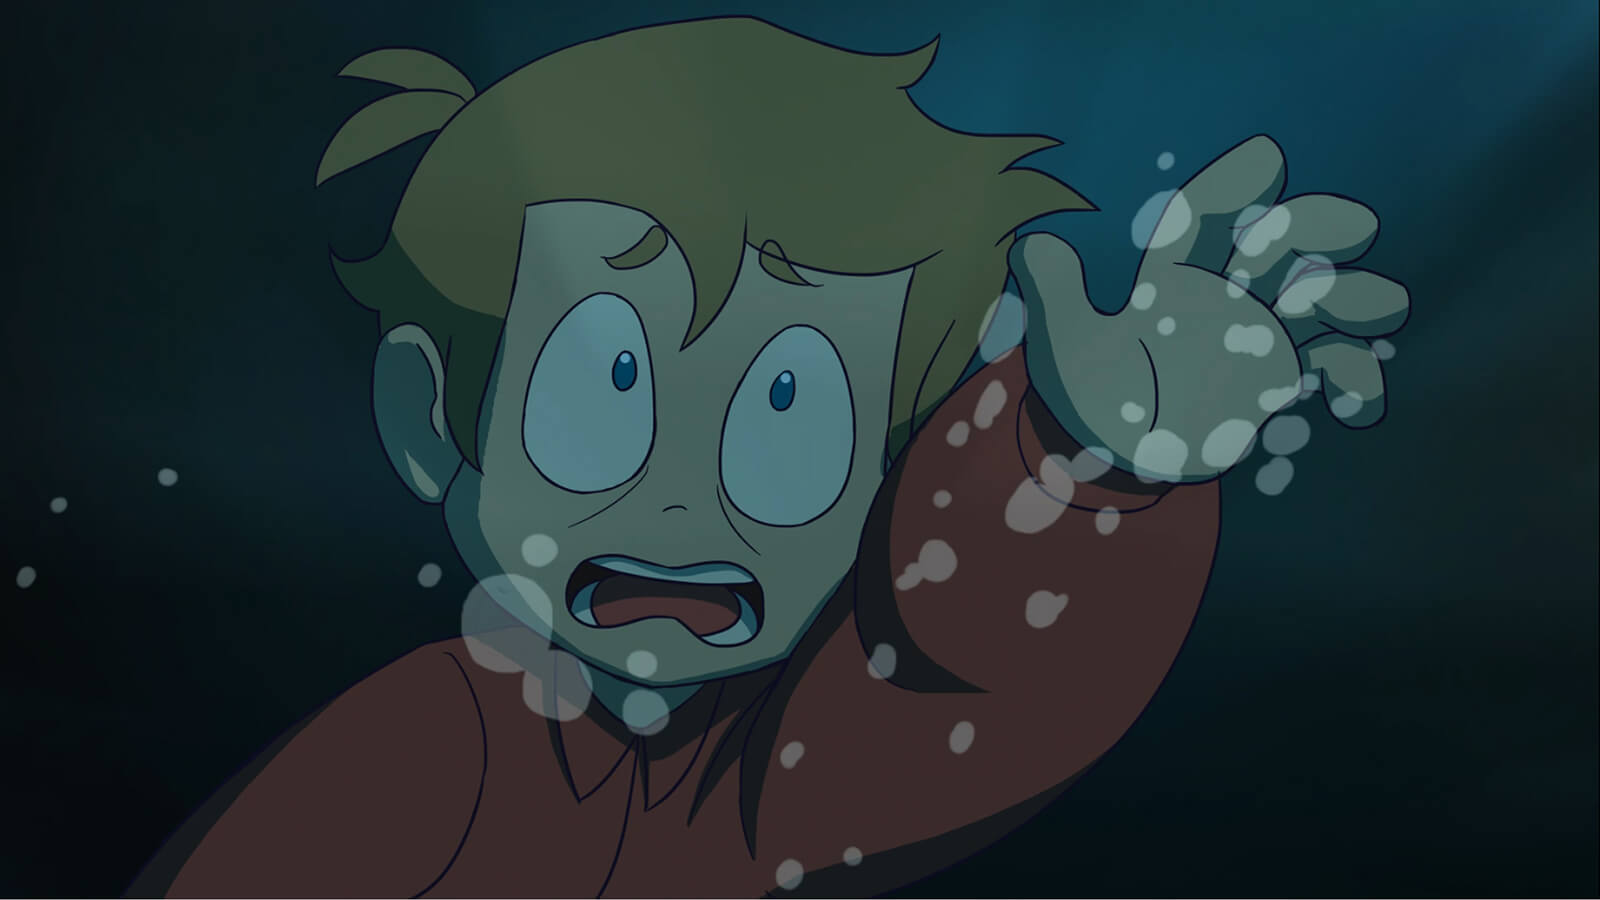 A panicked boy submerged in the ocean reaches up.